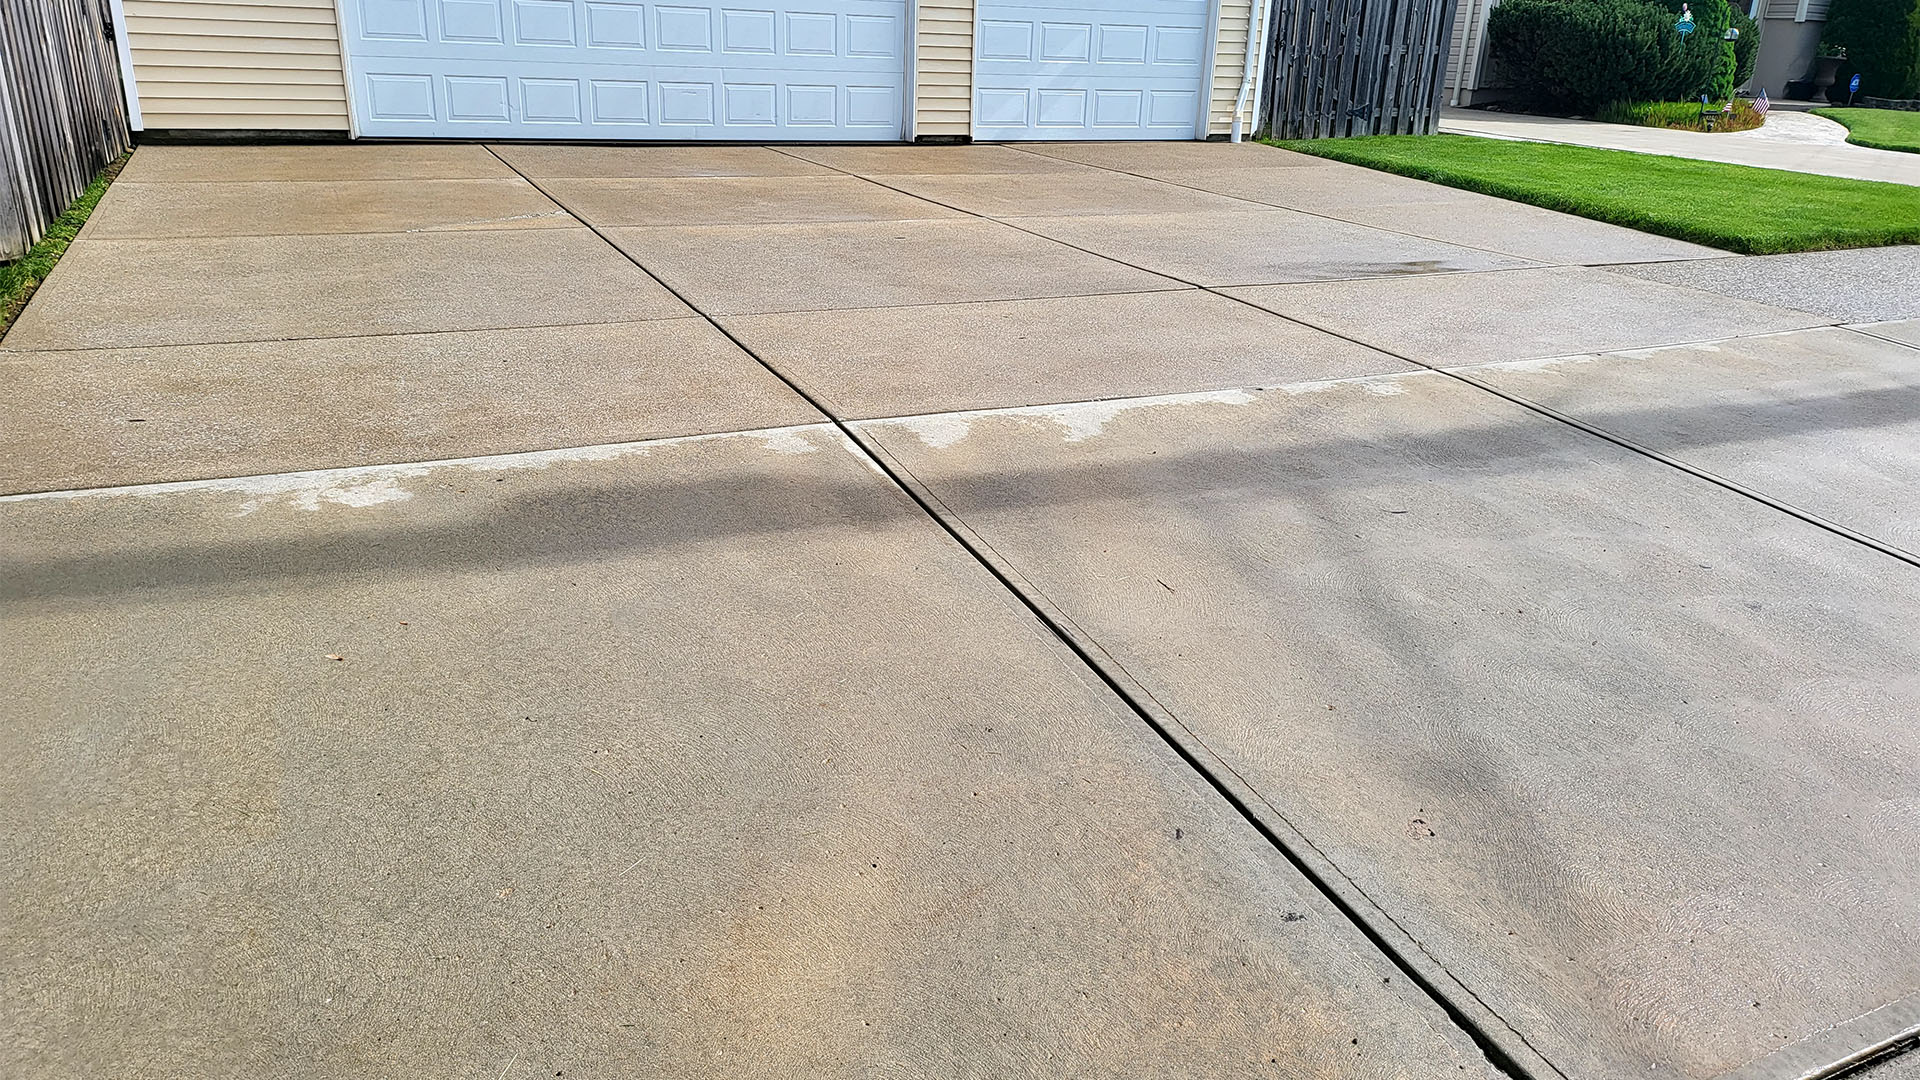 Willoughby Pressure Washing,Pressure Washing Willoughby,Willoughby Driveway Cleaning,Driveway Cleaning Willoughby,Willoughby Roof Cleaning,Roof Cleaning Willoughby,Willoughby Roof Pressure Washing,Roof Pressure Washing Willoughby,Willoughby Driveway Pressure Washing,Driveway Pressure Washing Willoughby,Willoughby Window Washing,Window Washing Willoughby